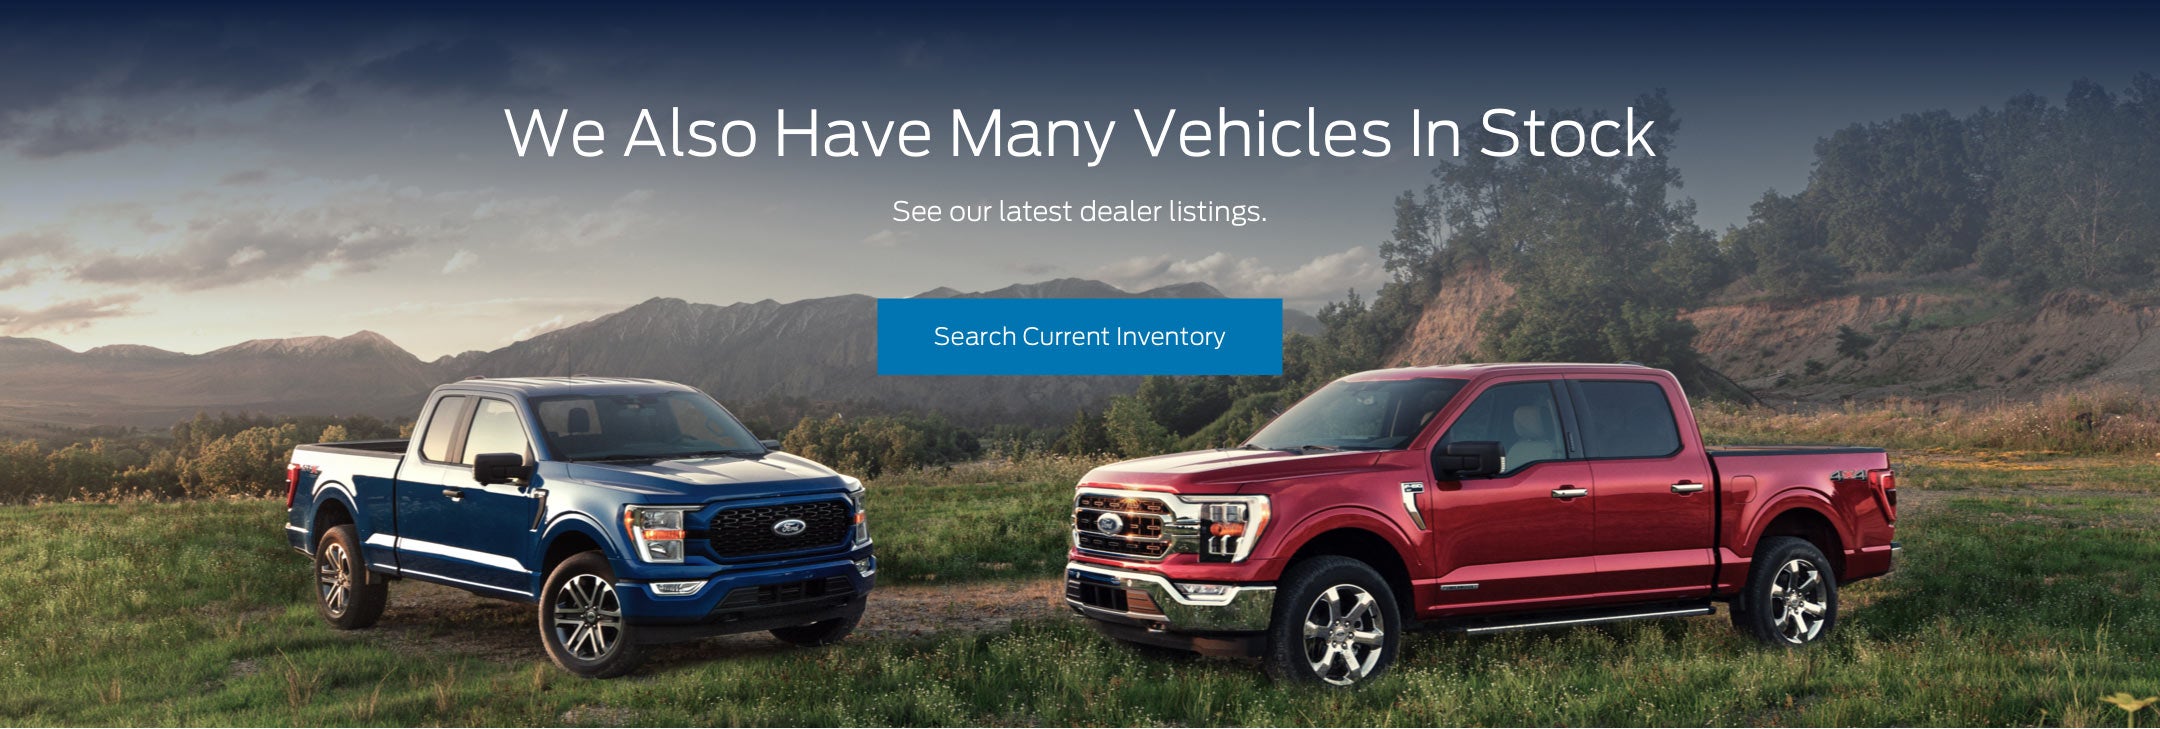 Ford vehicles in stock | Randy Marion Ford Lincoln, LLC in Statesville NC